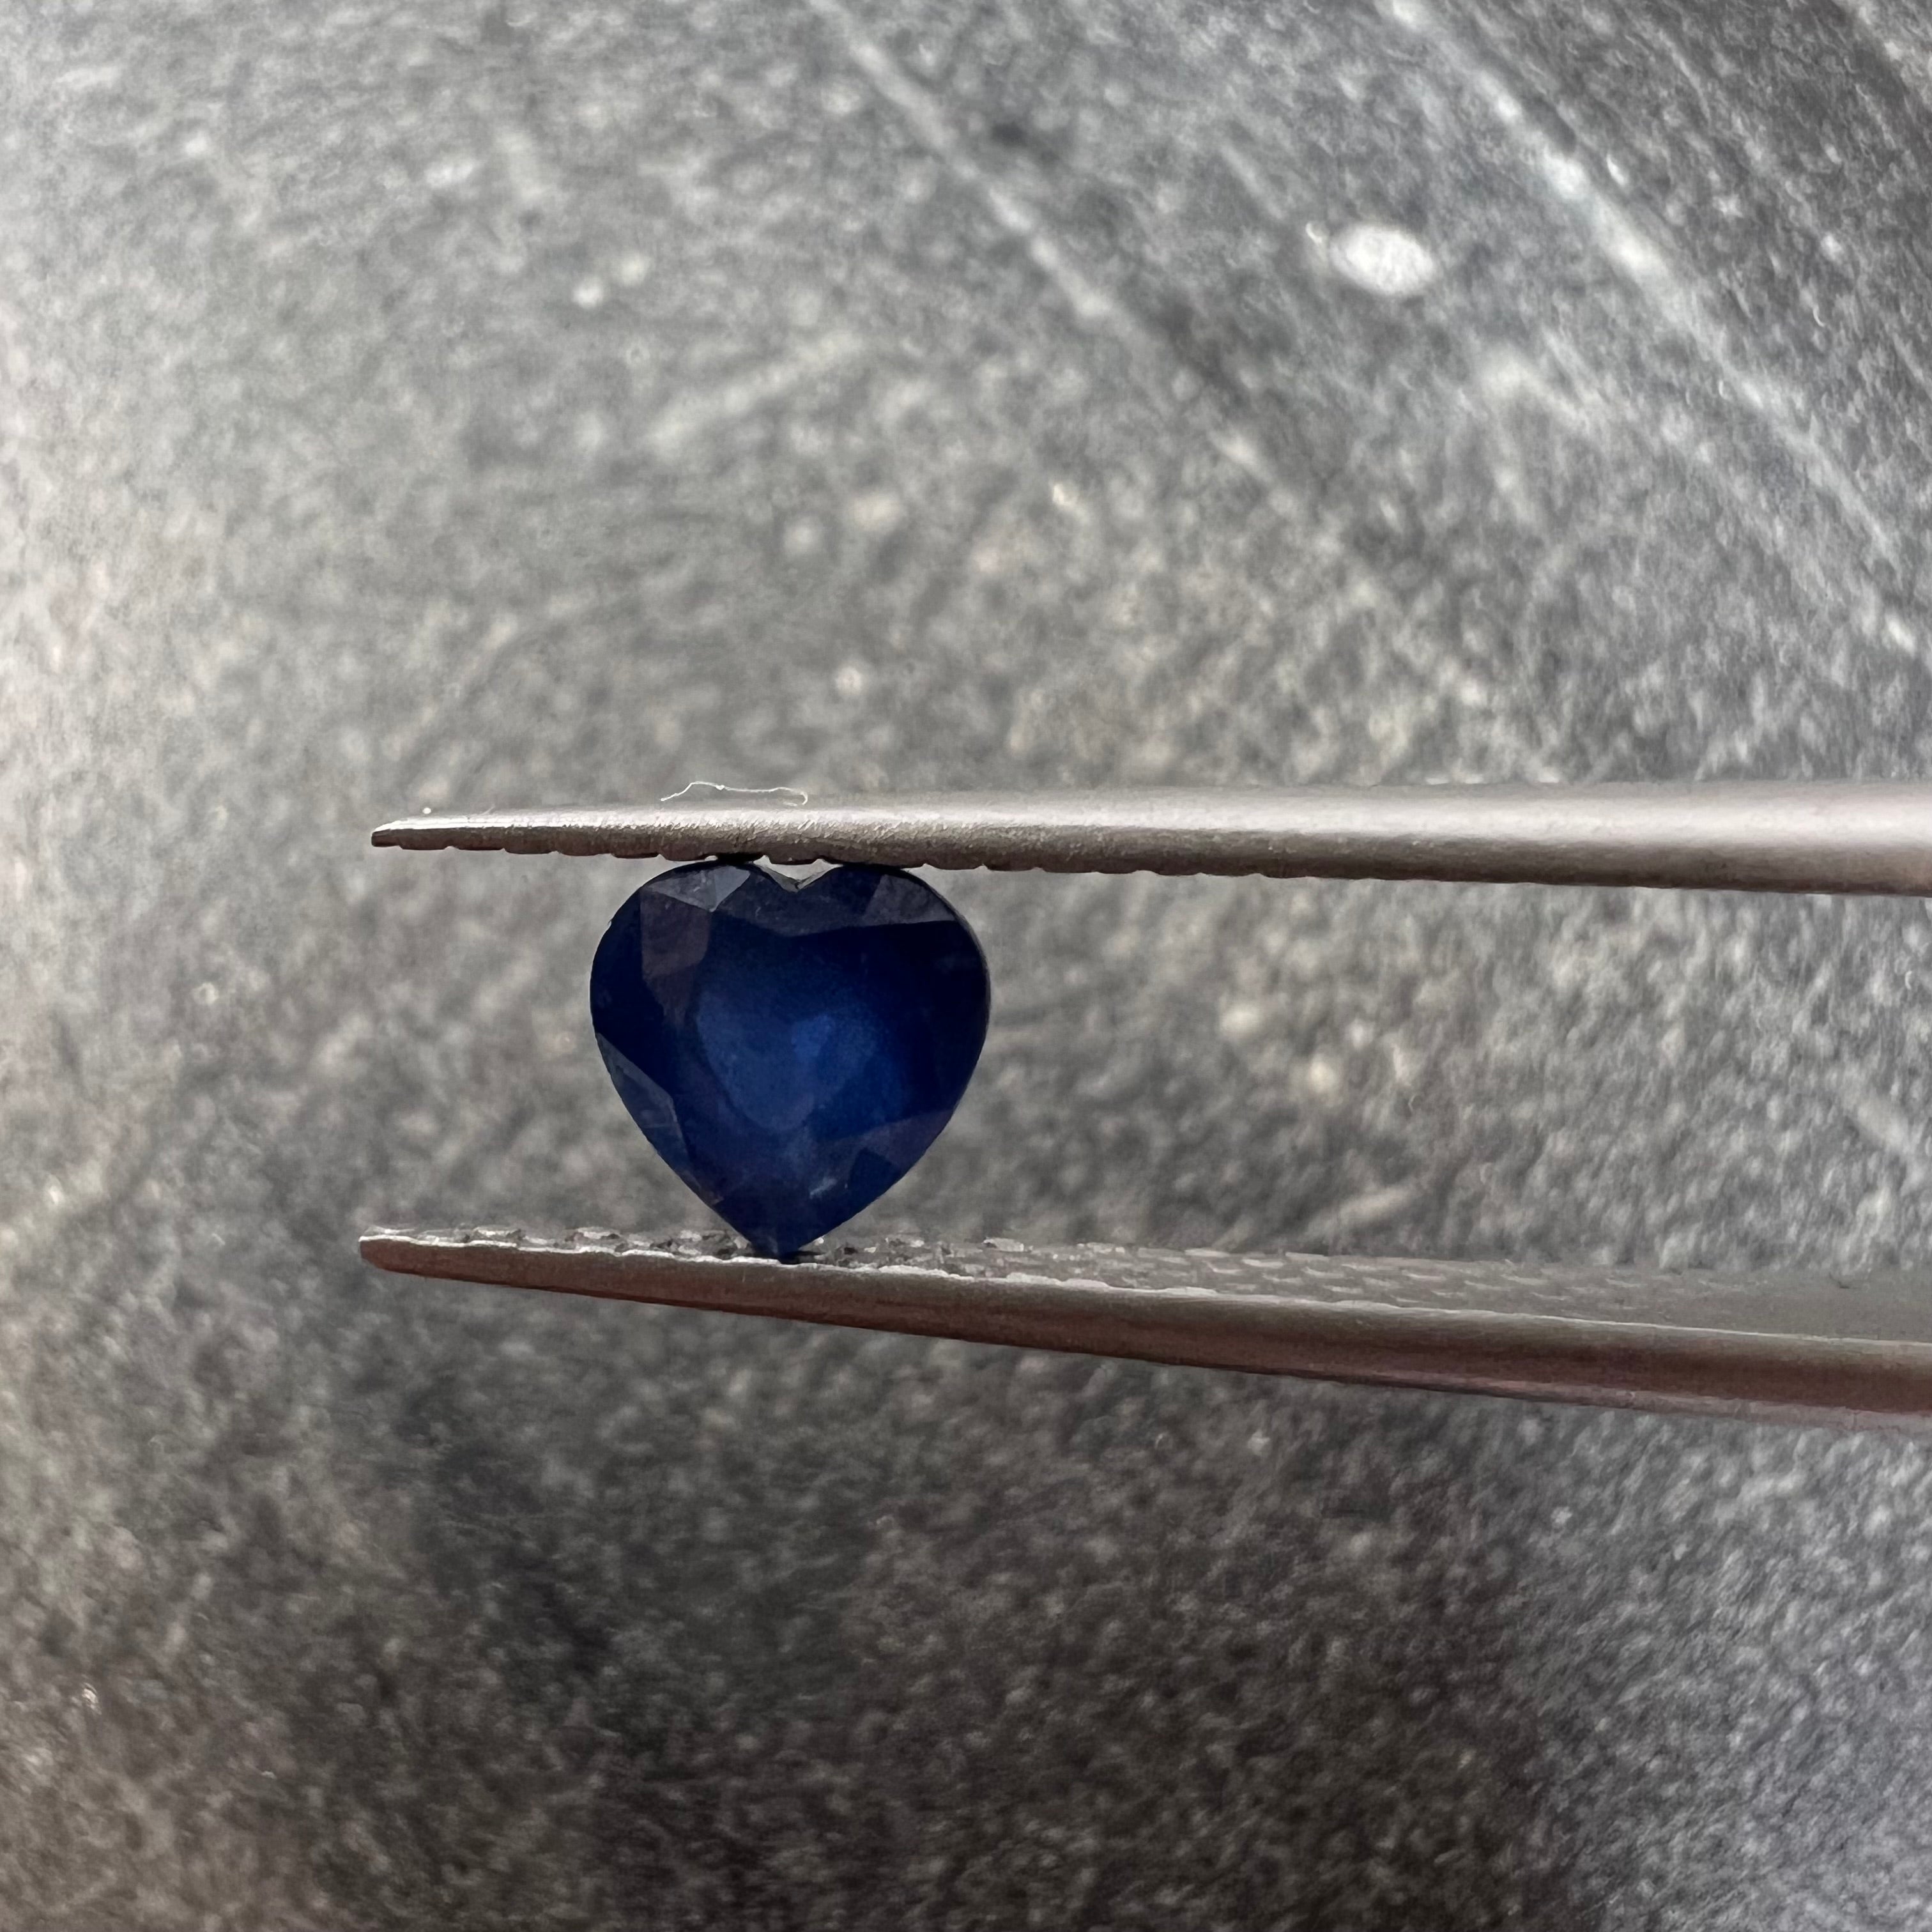 .71CT Loose Natural Heart Sapphire 5.00x5.09x3.20mm Earth mined Gemstone